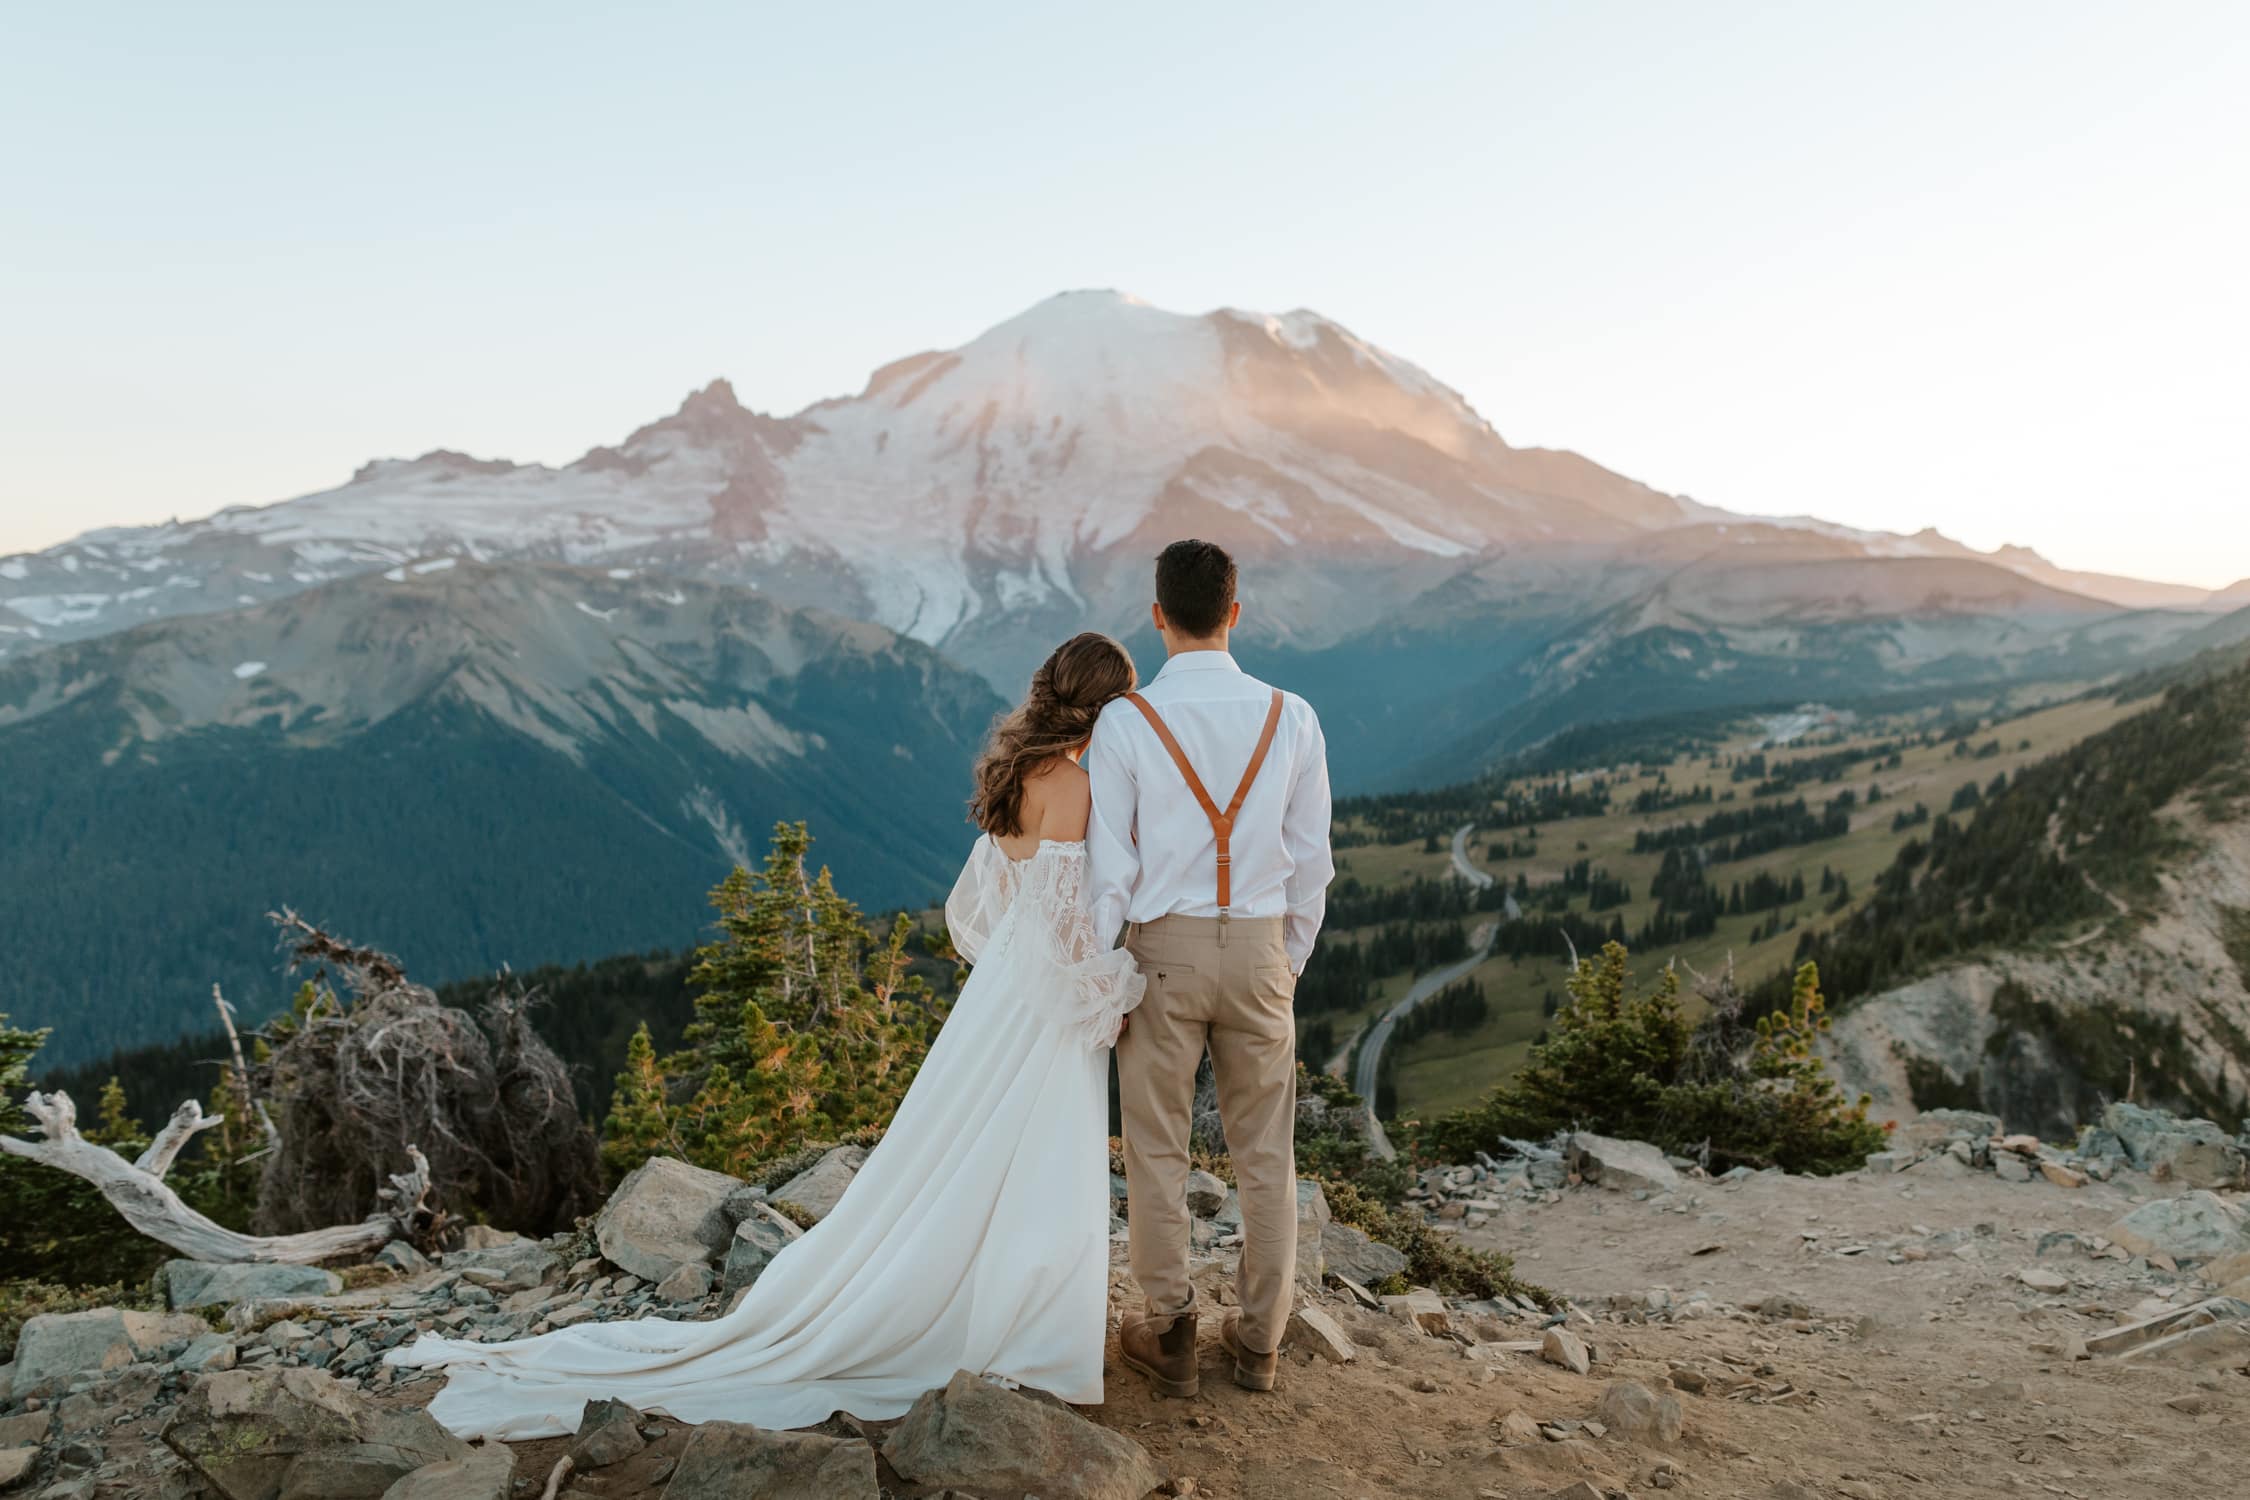 A couple in wedding attire with their backs to the camera looking at Mt. Rainier.